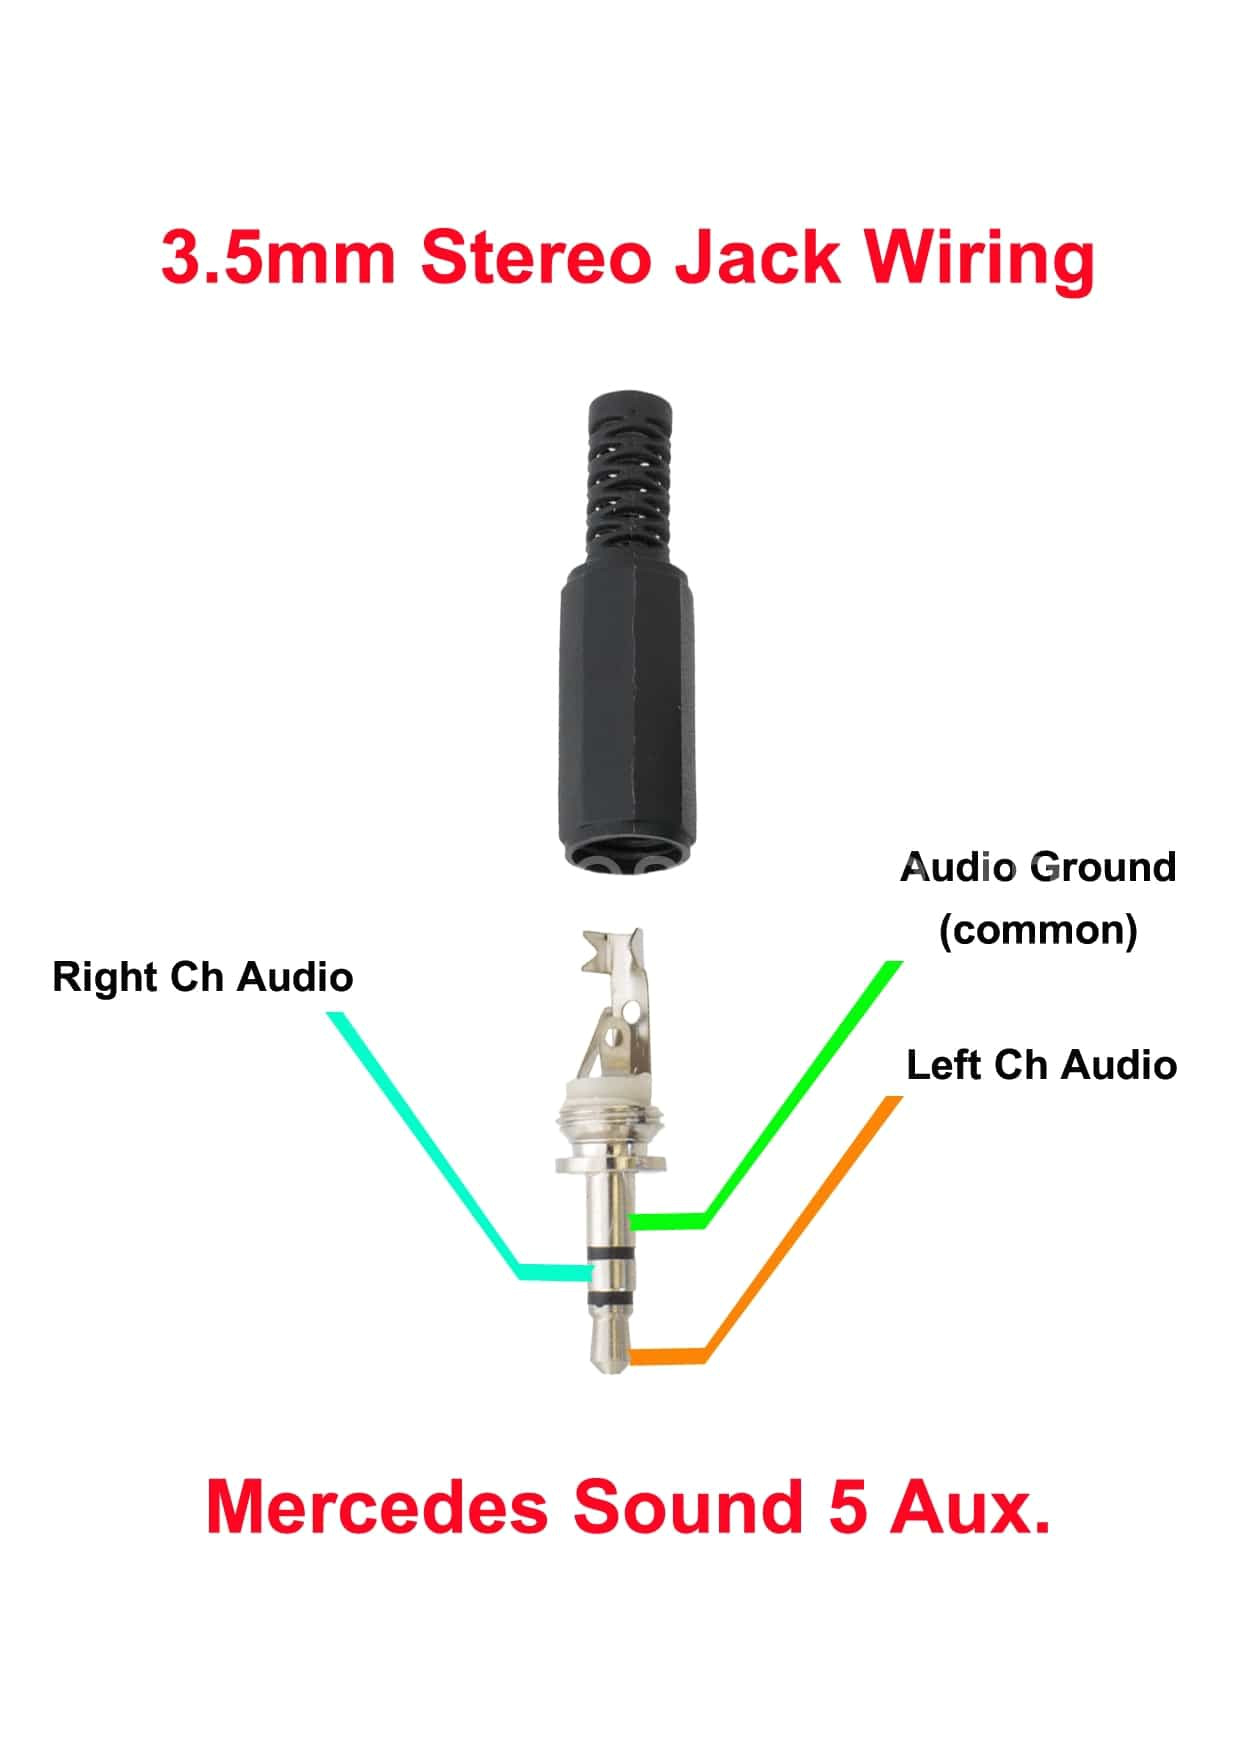 wiring a 3 5mm stereo jack new wiring diagram 3 5mm jack wiring diagram wiring diagram